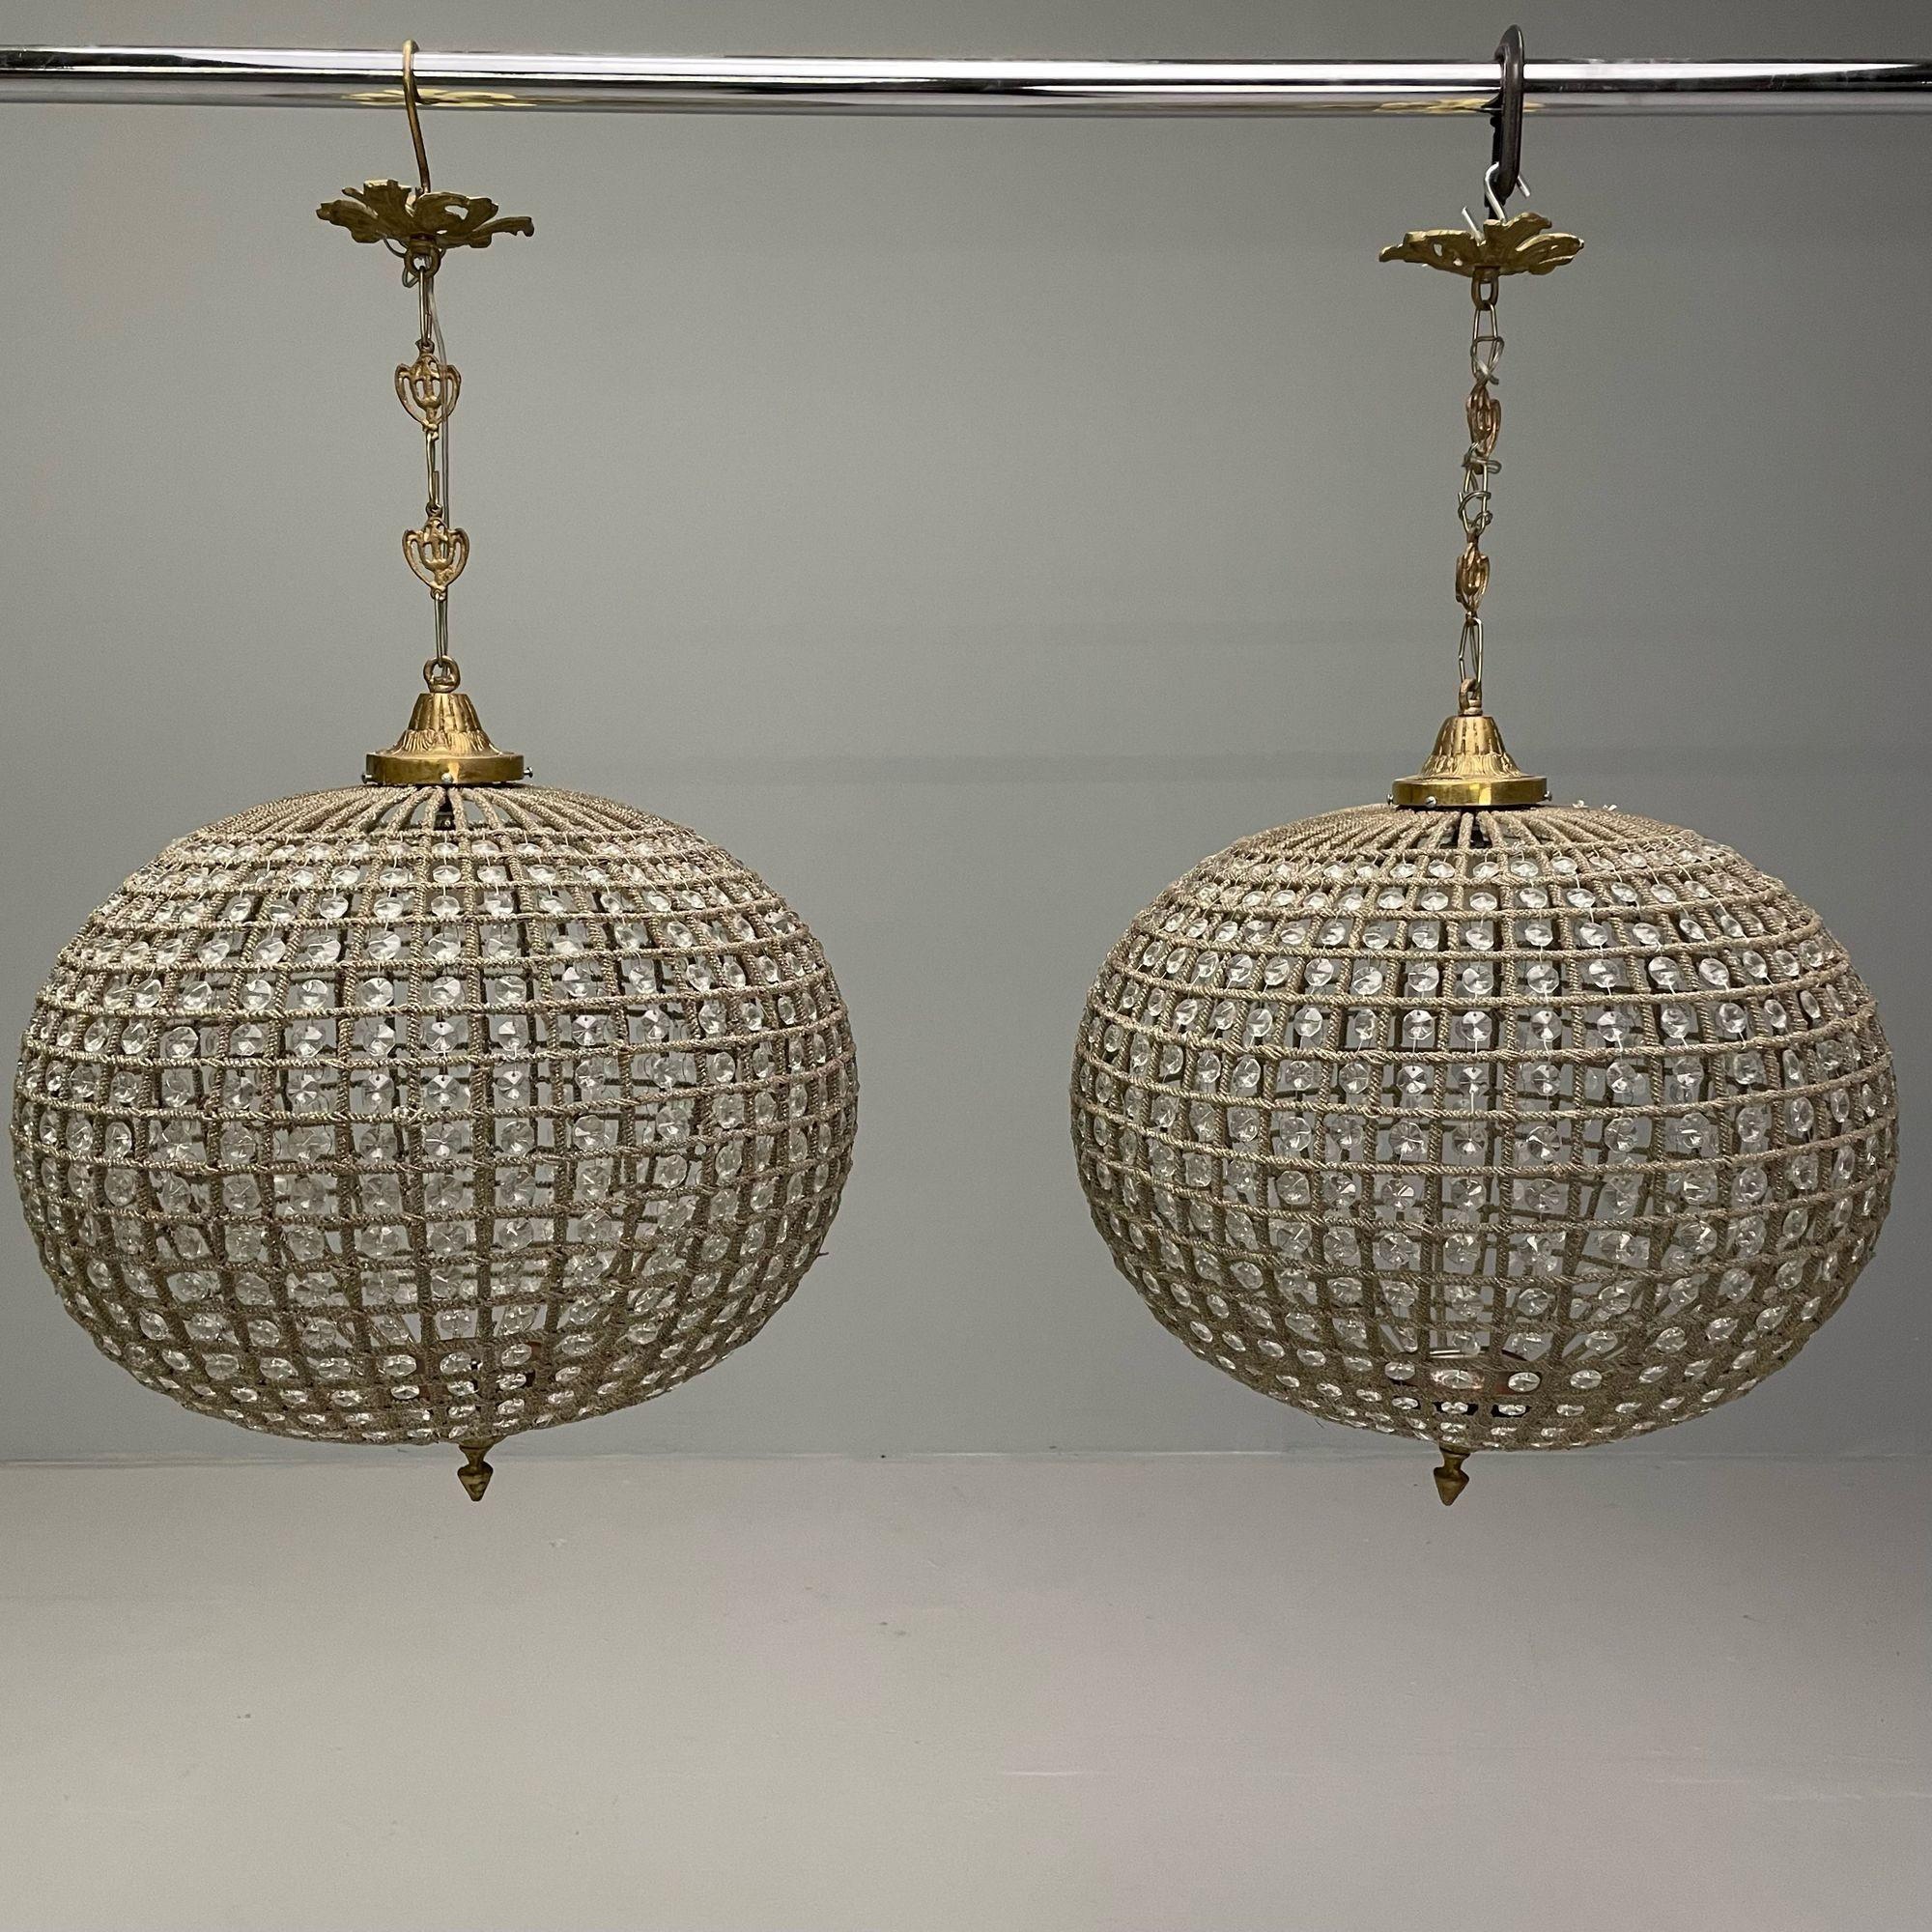 Mid-Century Modern Art Deco, Round Chandeliers, Beveled Crystal, Metal, American, 1980s For Sale